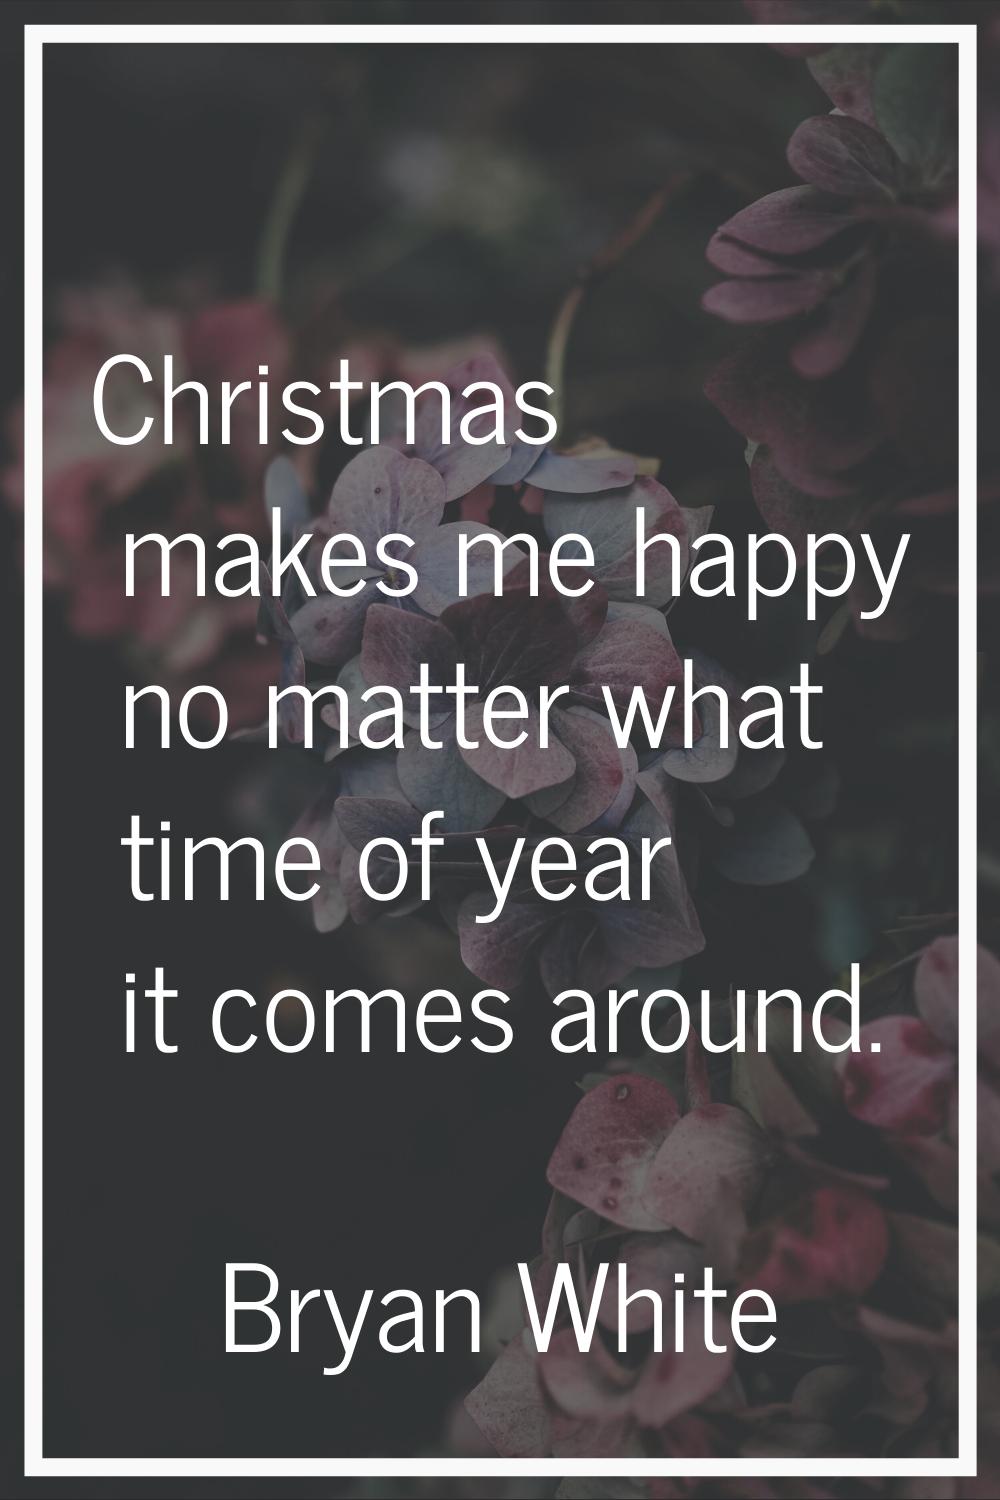 Christmas makes me happy no matter what time of year it comes around.